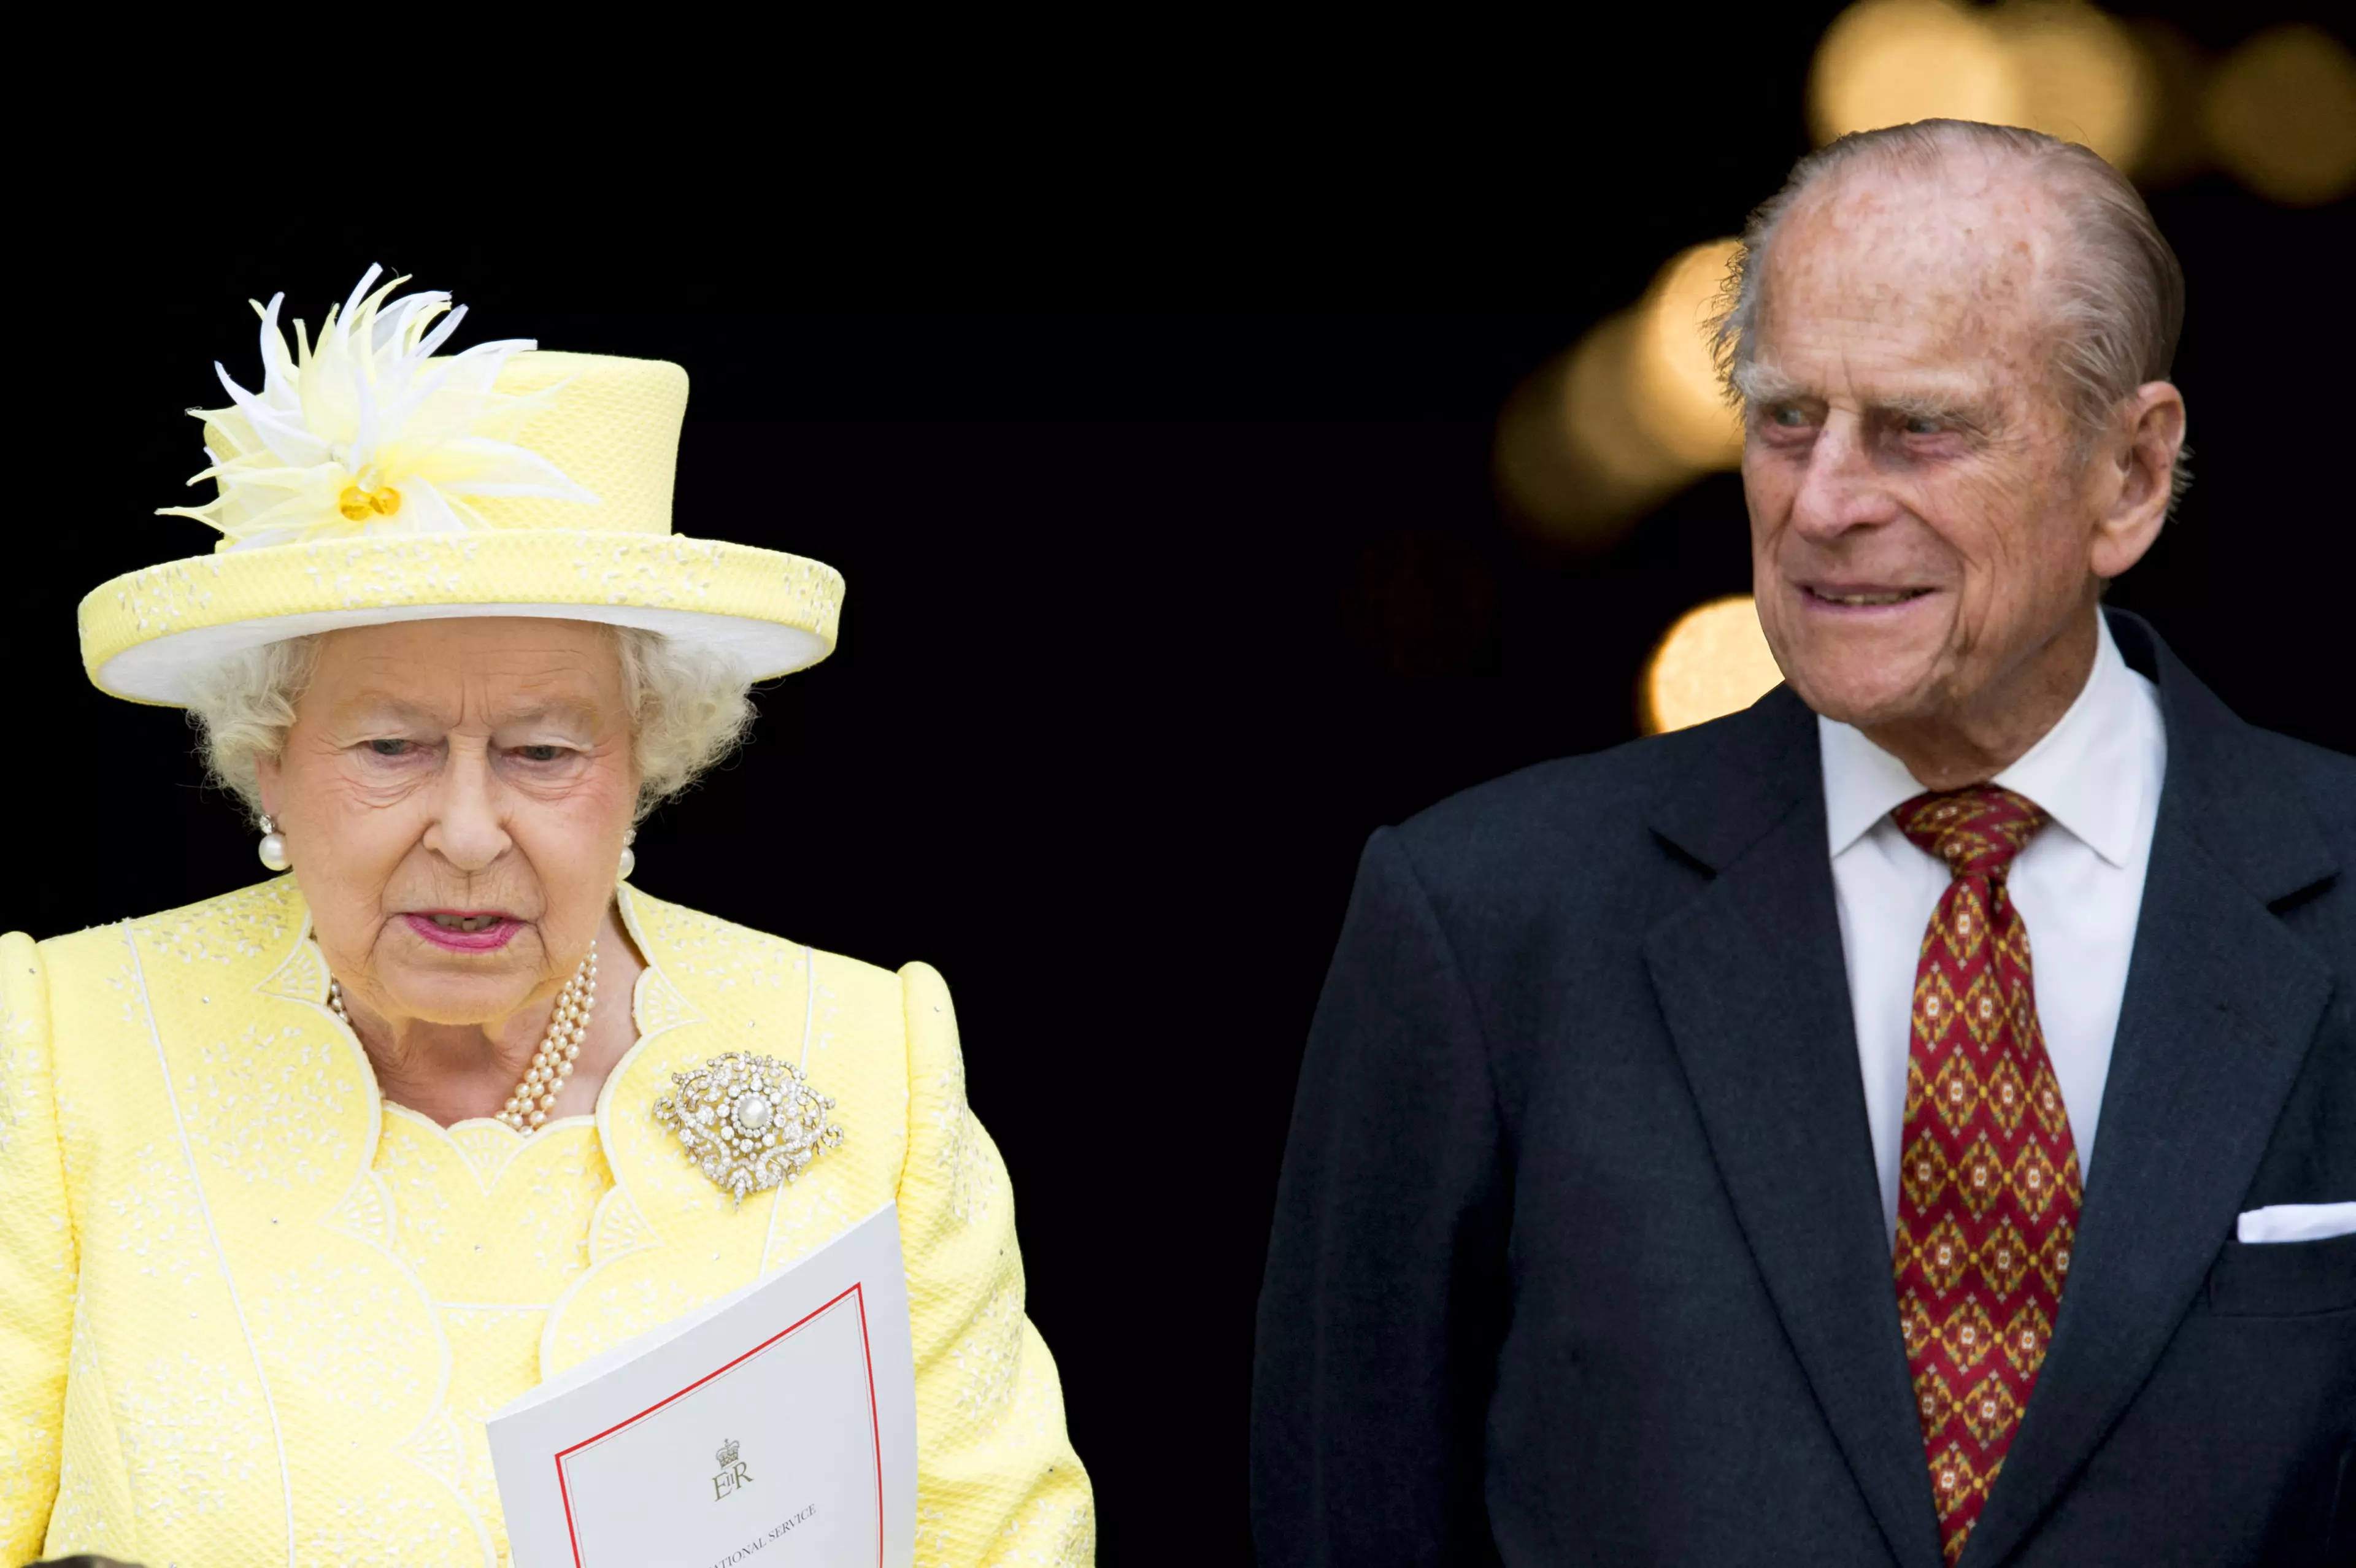 Prince Philip died with the Queen by his side (